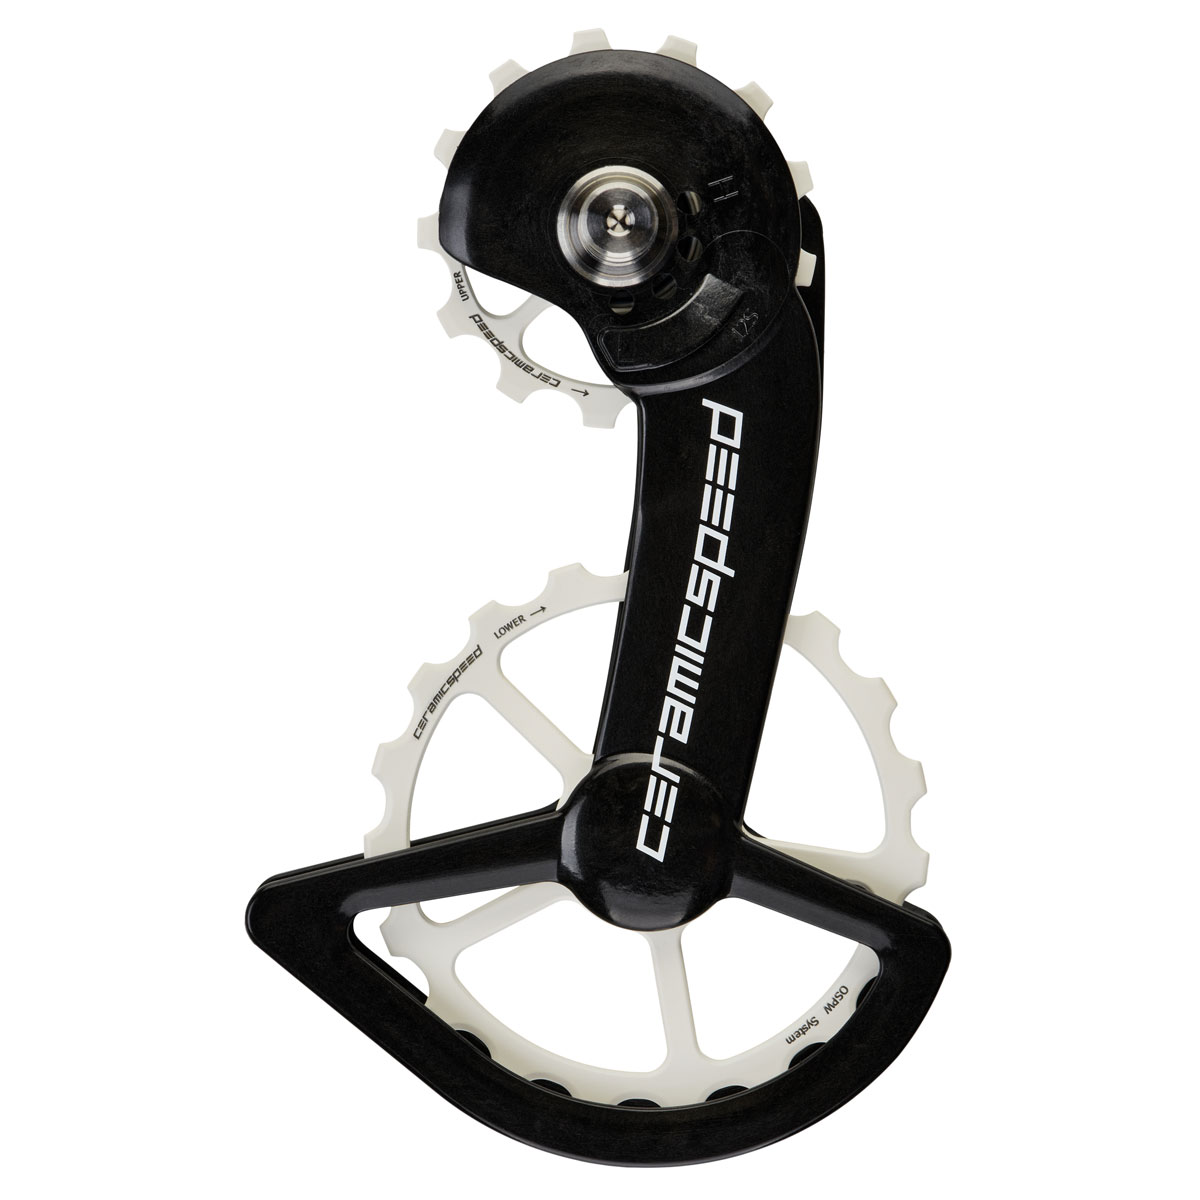 Picture of CeramicSpeed OSPW Derailleur Pulley System - for Shimano R9250/R8150 (12s) | 13/19 Teeth | Coated Bearings | Cerakote Limited Edition - white